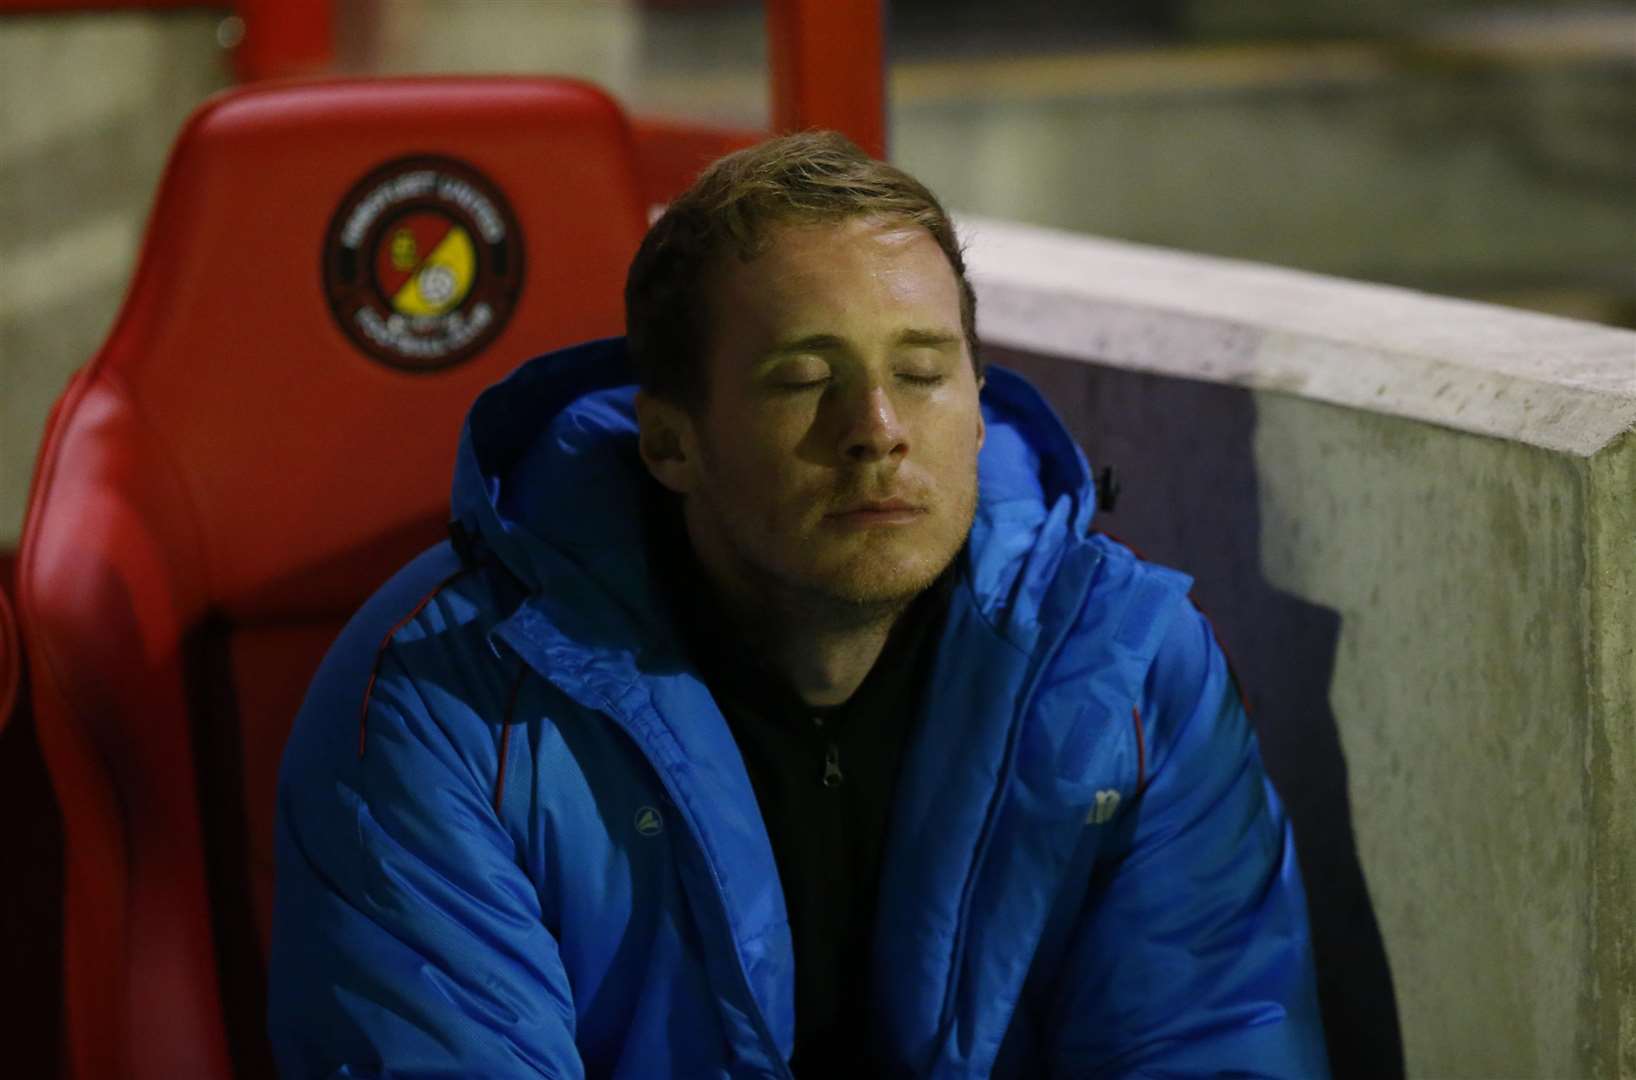 Deep in thought at Ebbsfleet Picture: Andy Jones